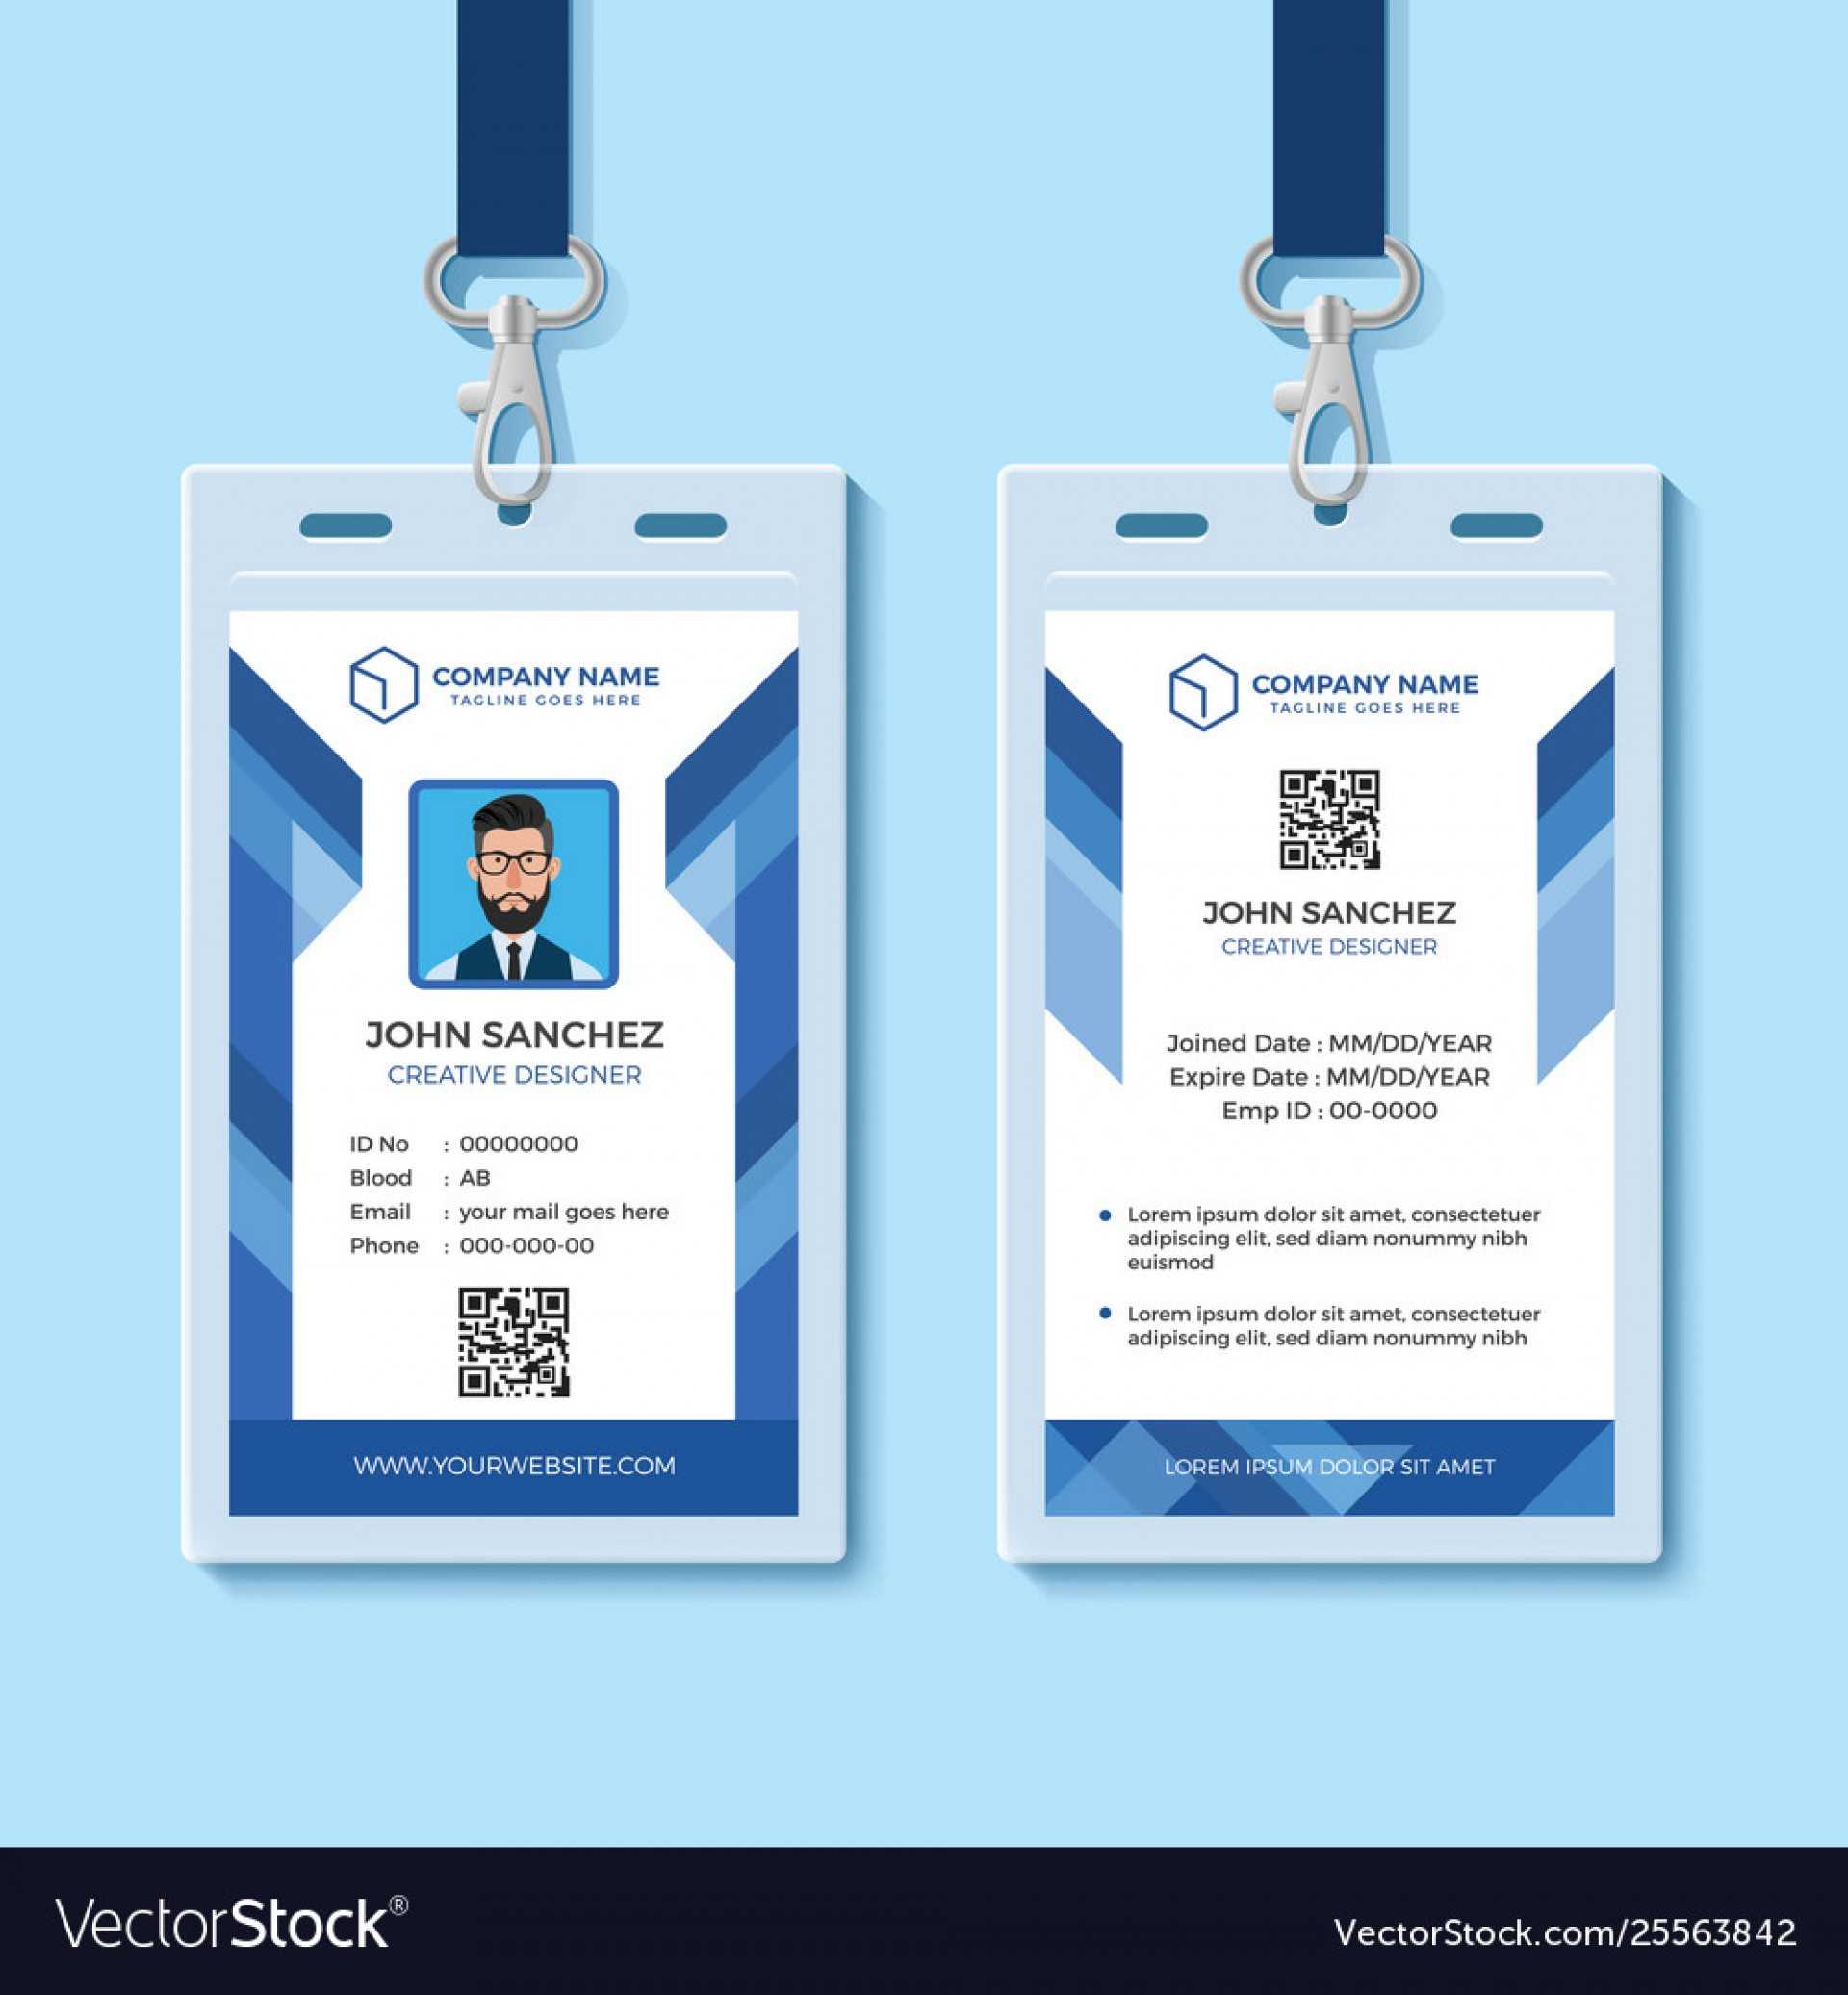 025 Template Ideas Employee Id Card Templates Blue Design For Employee Card Template Word